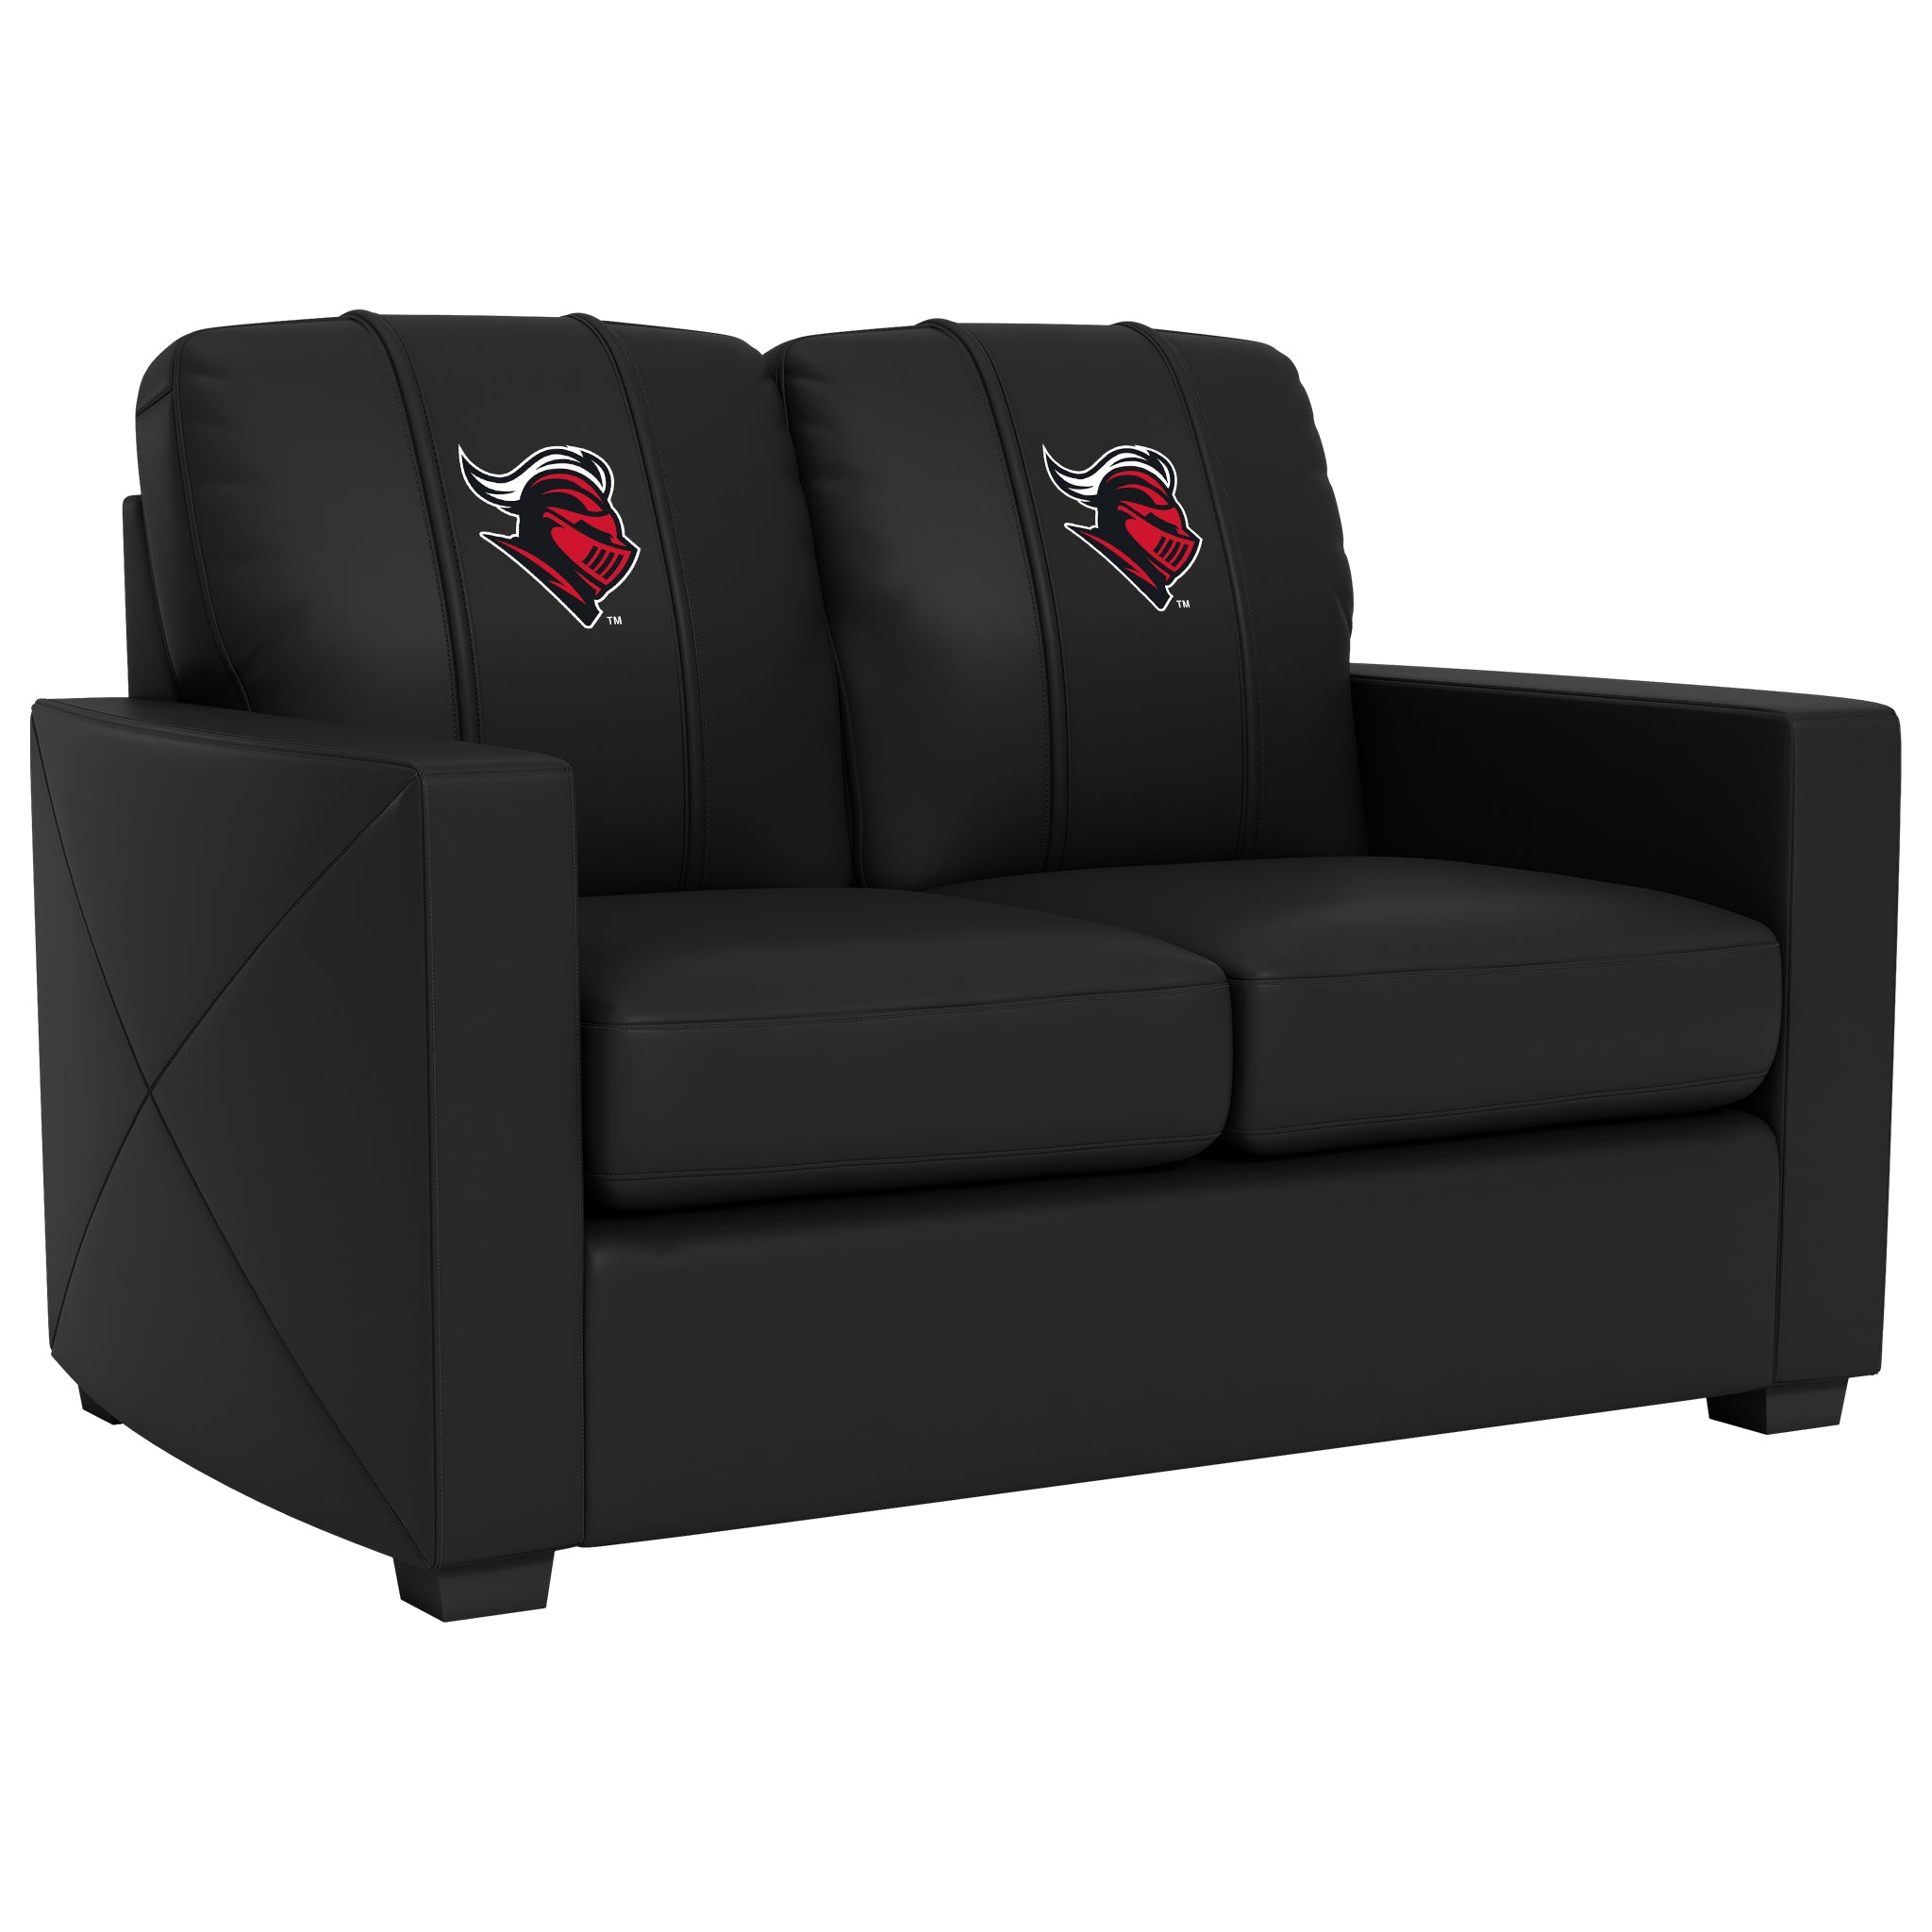 Rutgers Scarlet Knights  Silver Loveseat with Rutgers Scarlet Knights Head Logo